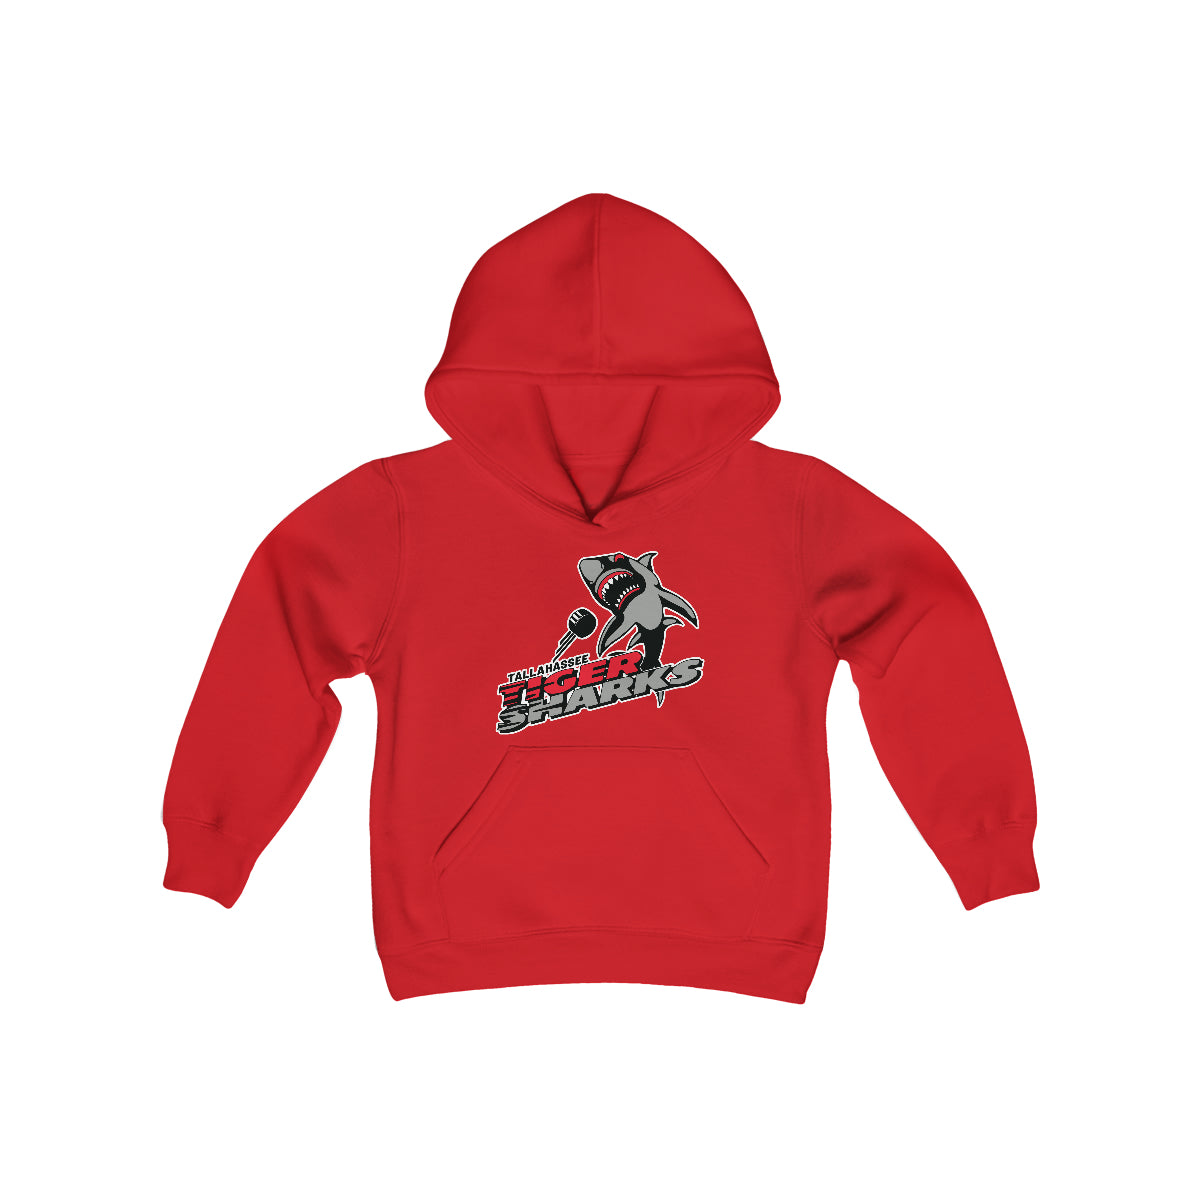 Tallahassee Tiger Sharks Hoodie (Youth)